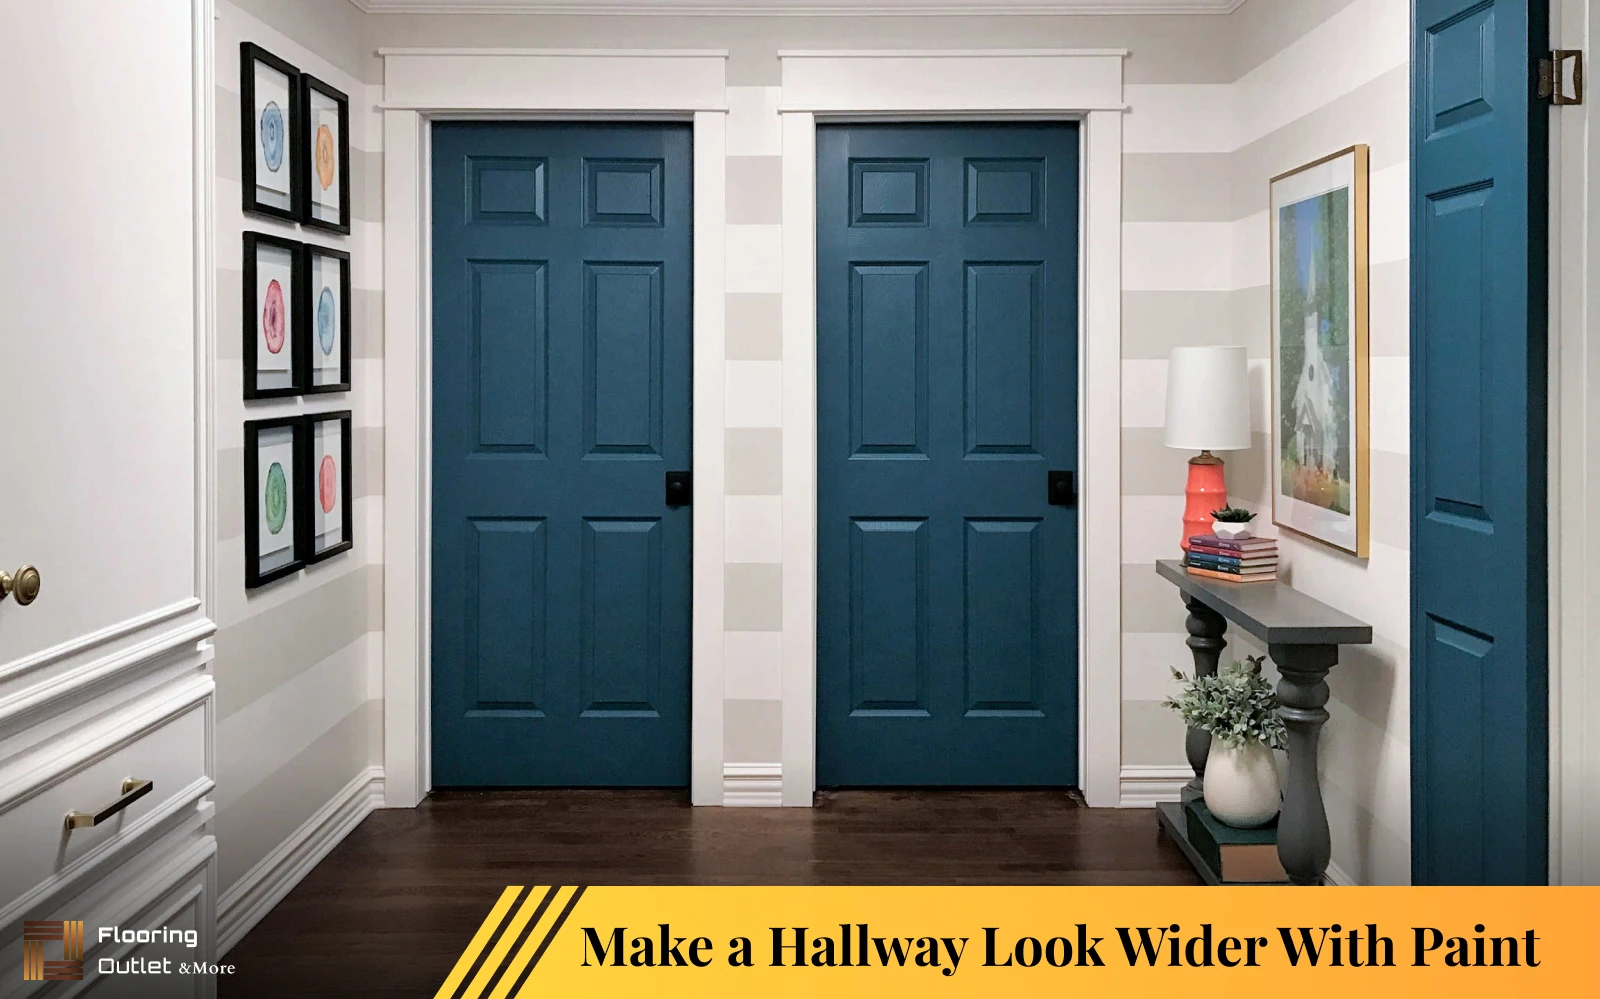 How to make a hallway look wider with paint